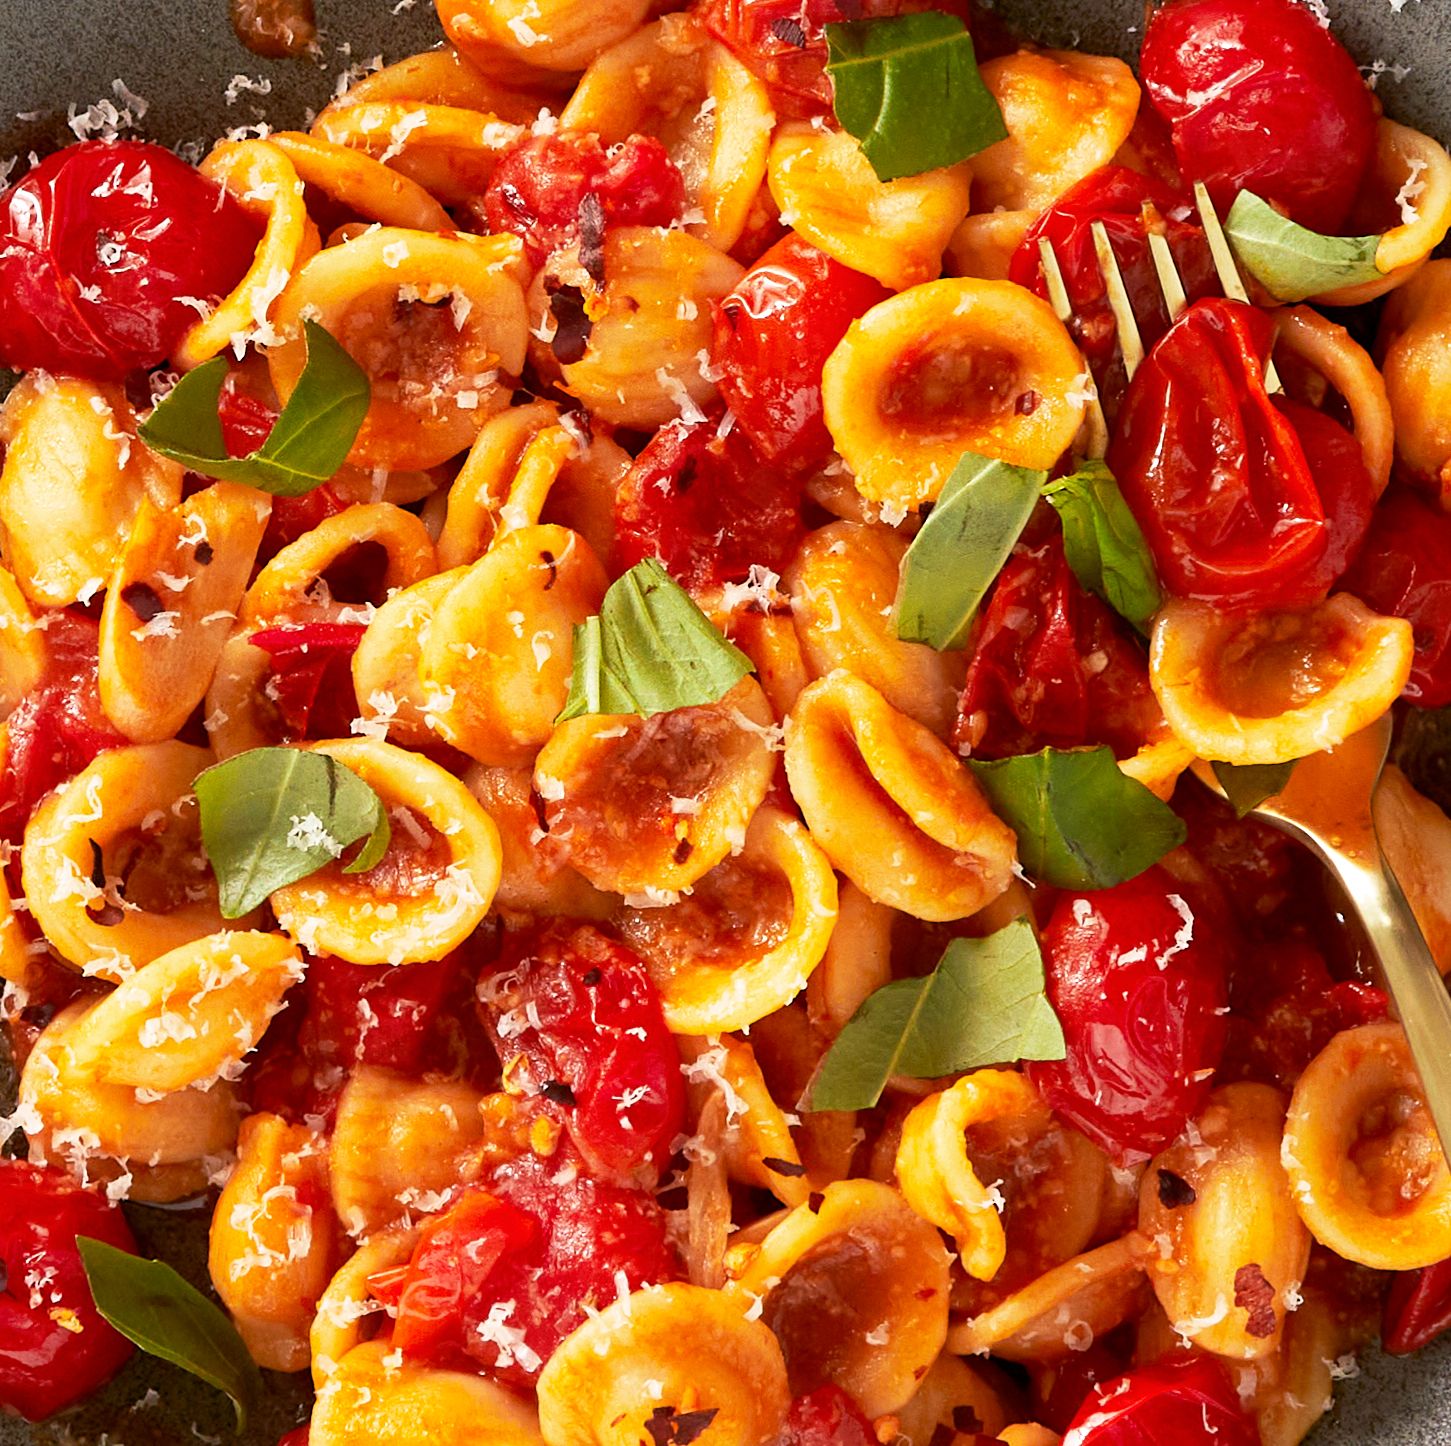 27 Cherry Tomato Recipes That Add Pops Of Summer Flavor To Every Meal